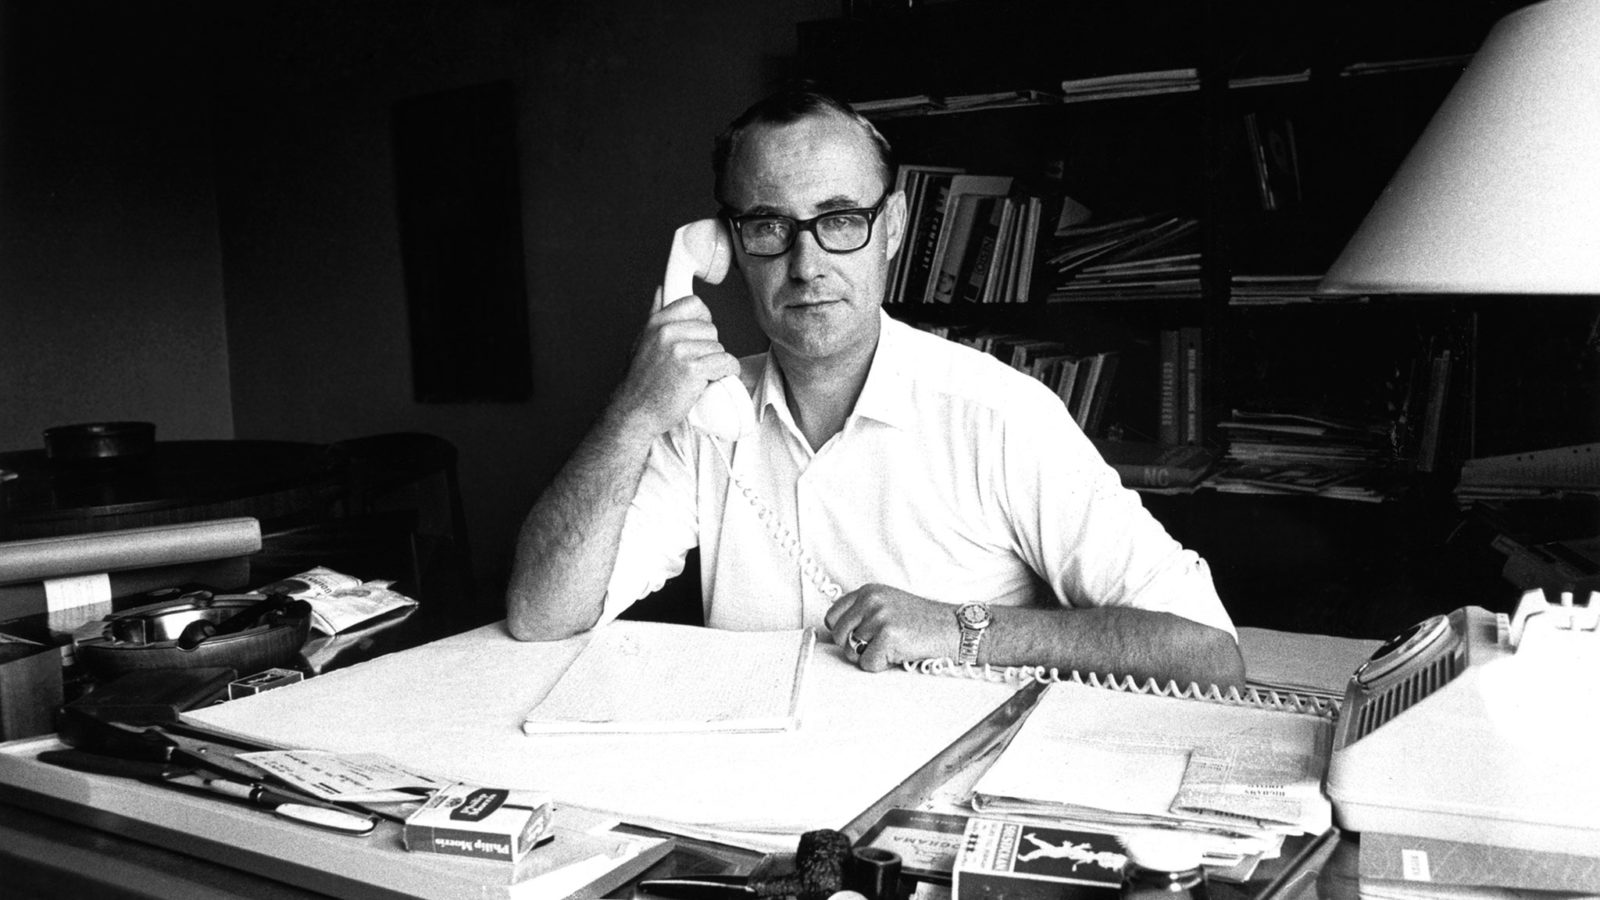 A black and white photo of Ingvar Kamprad at his desk, taking notes while talking on the phone.